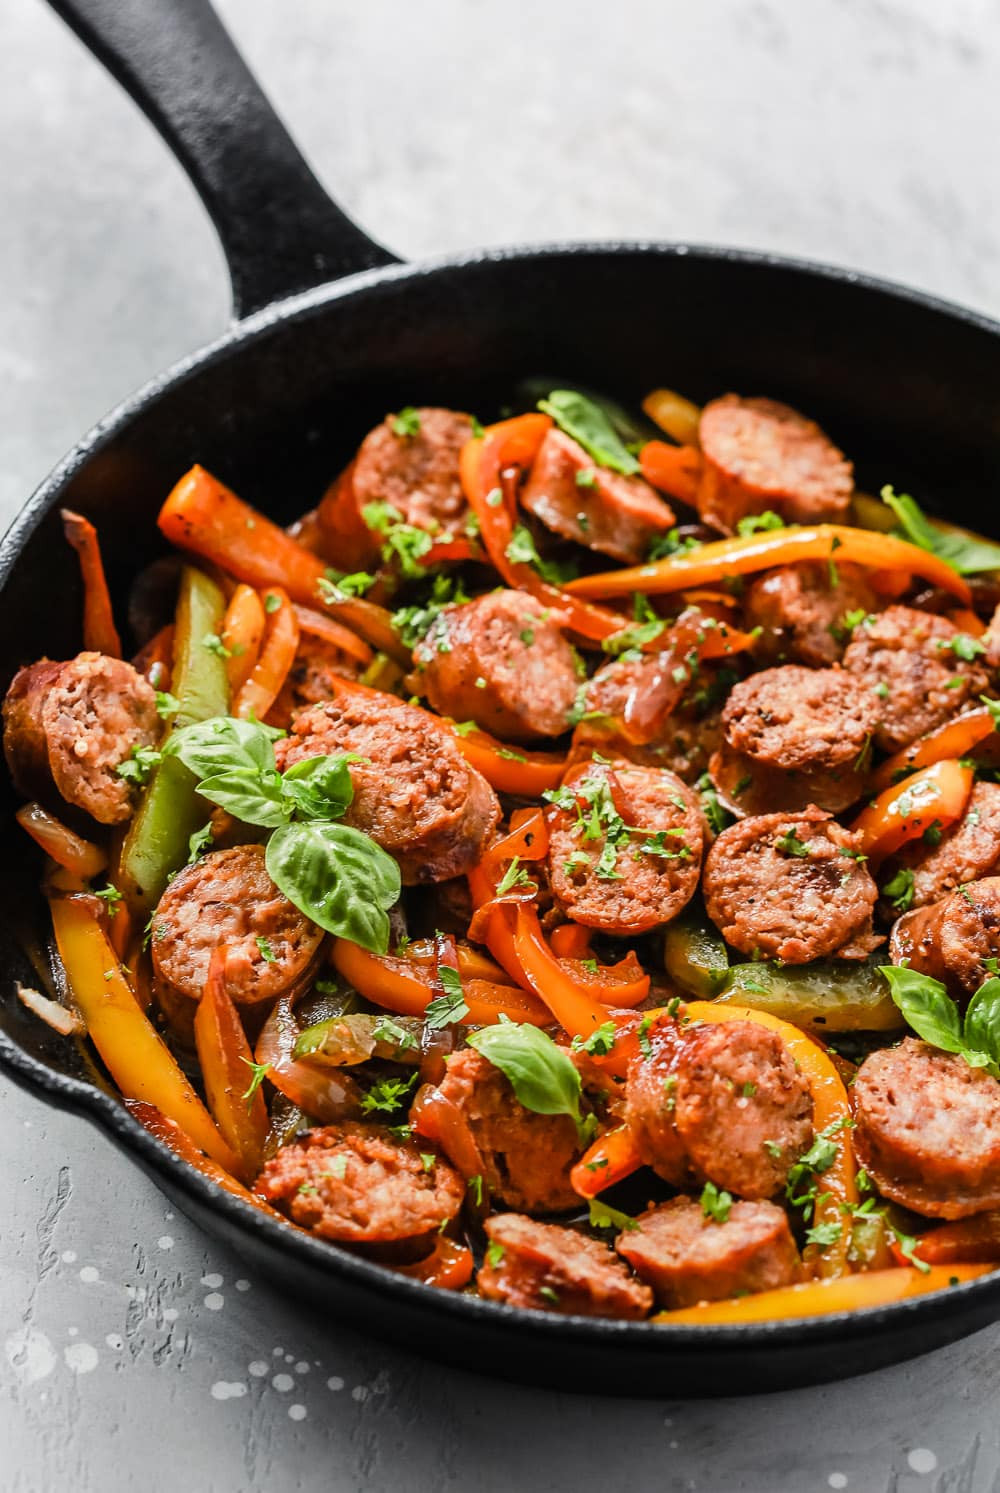 Recipes With Italian Sausage And Rice
 Italian Sausage ions and Peppers Skillet Ready in less